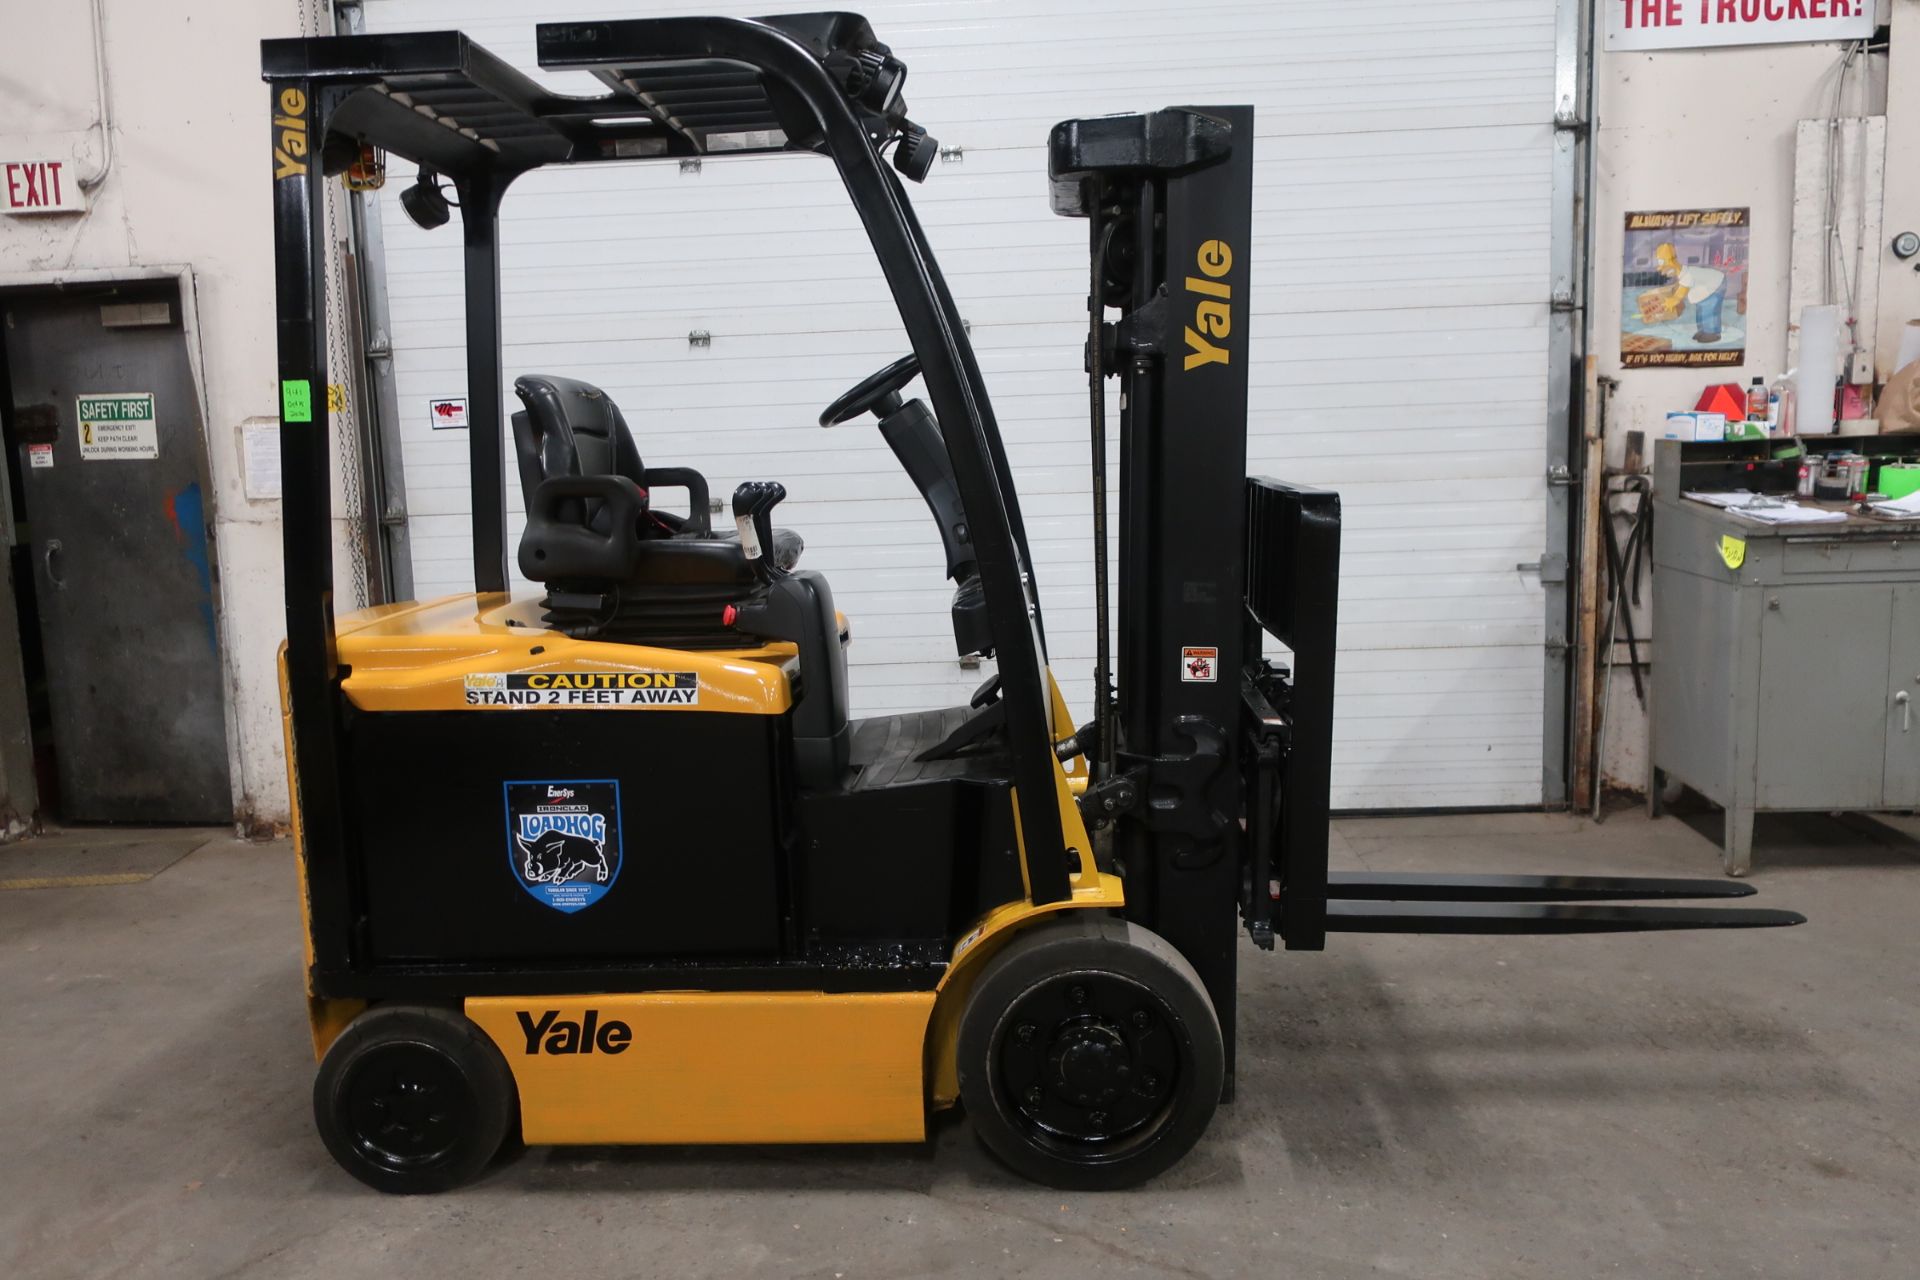 FREE CUSTOMS - 2014 Yale 5000lbs Capacity Forklift with 3-stage mast - electric with sideshift